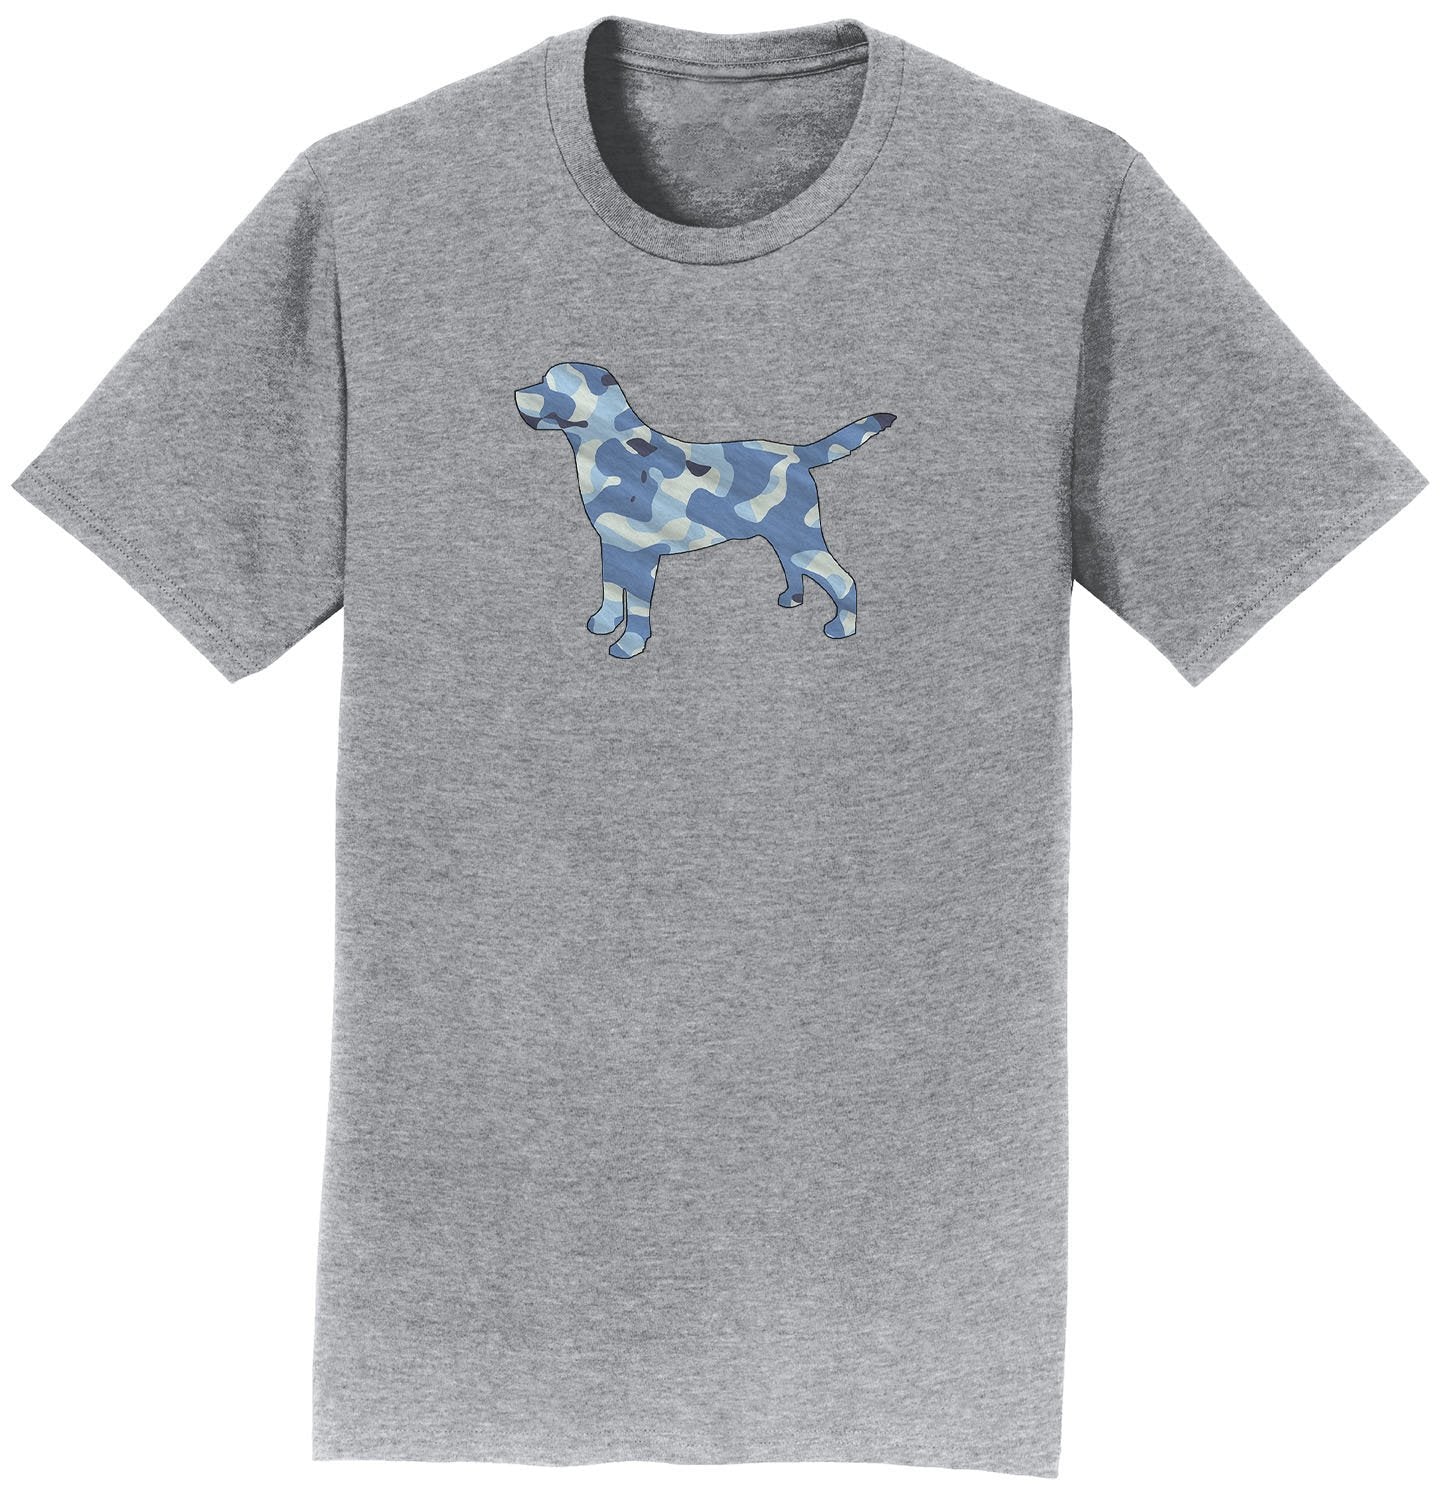 Blue Camouflage Silhouette - Adult Unisex T-Shirt